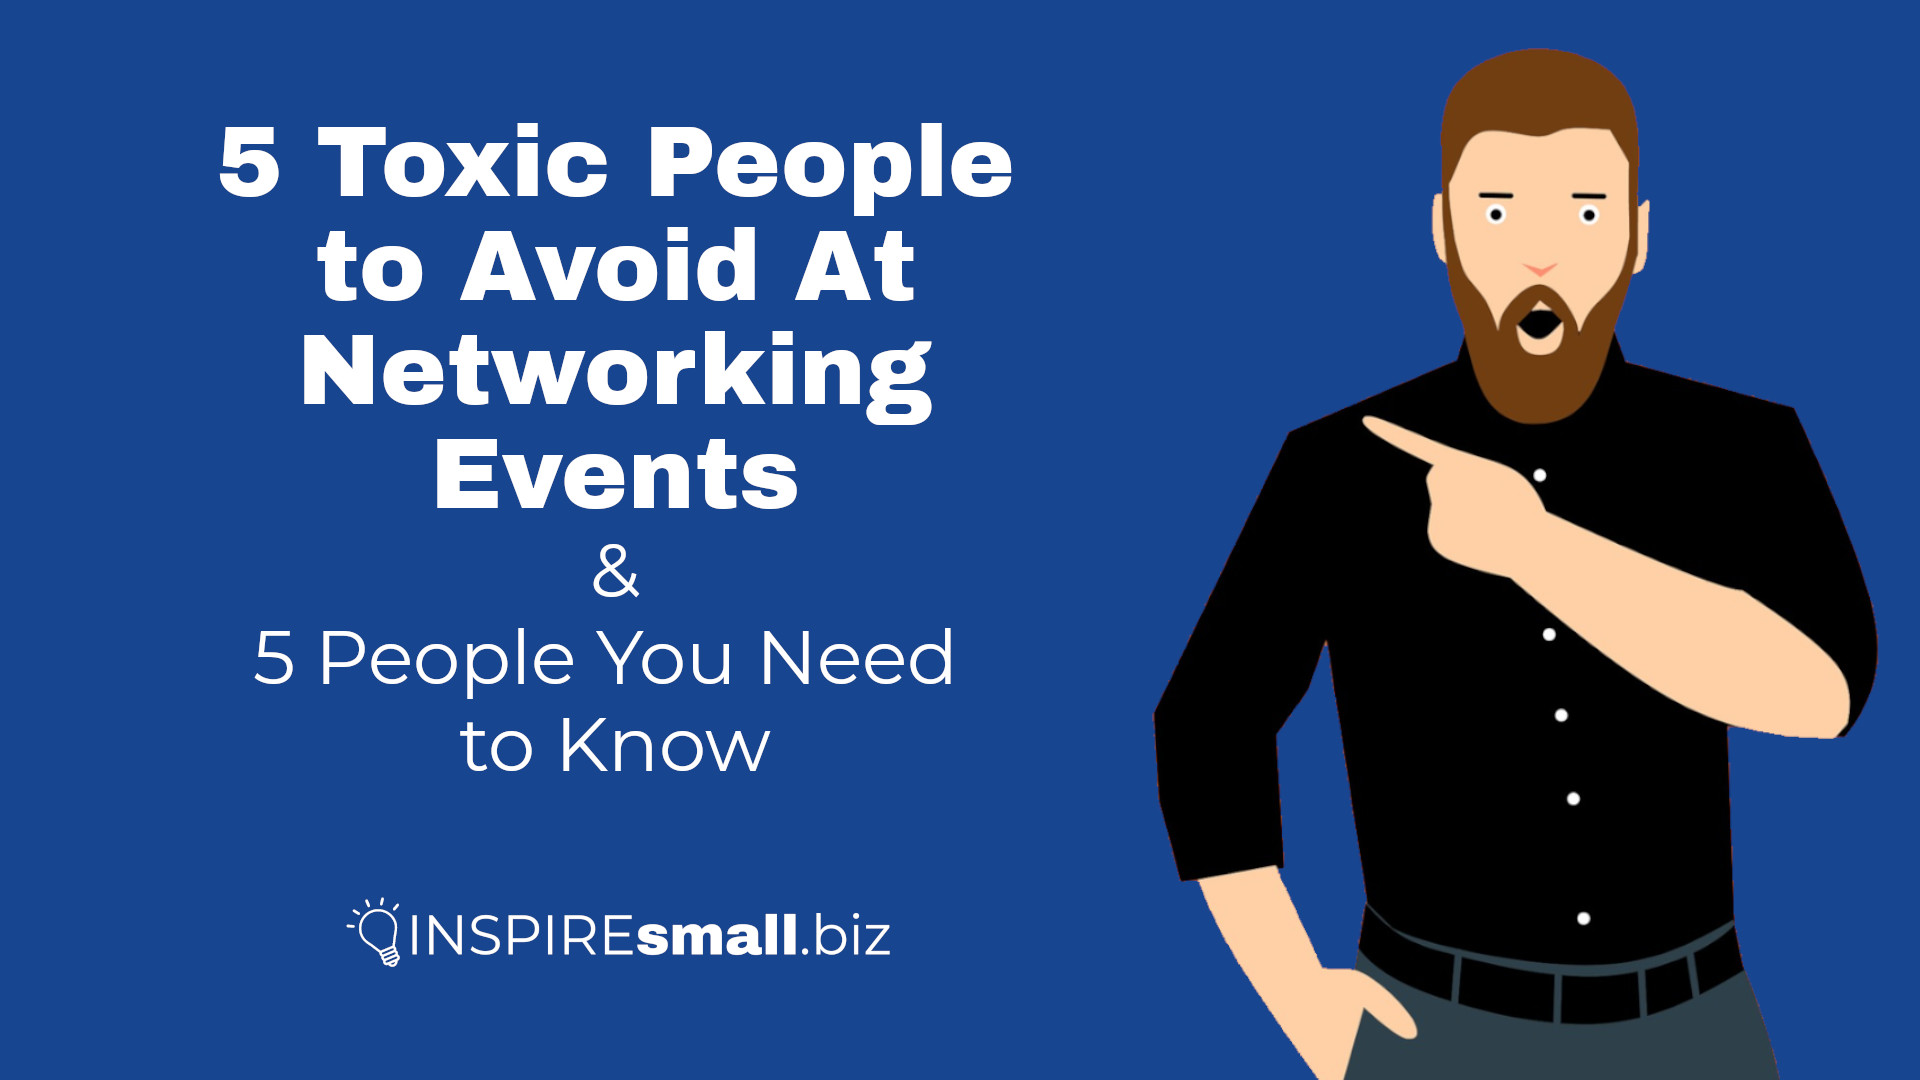 picture of man with a beard pointing at the text '5 toxic people to avoid at networking events, and 5 people you need to know'